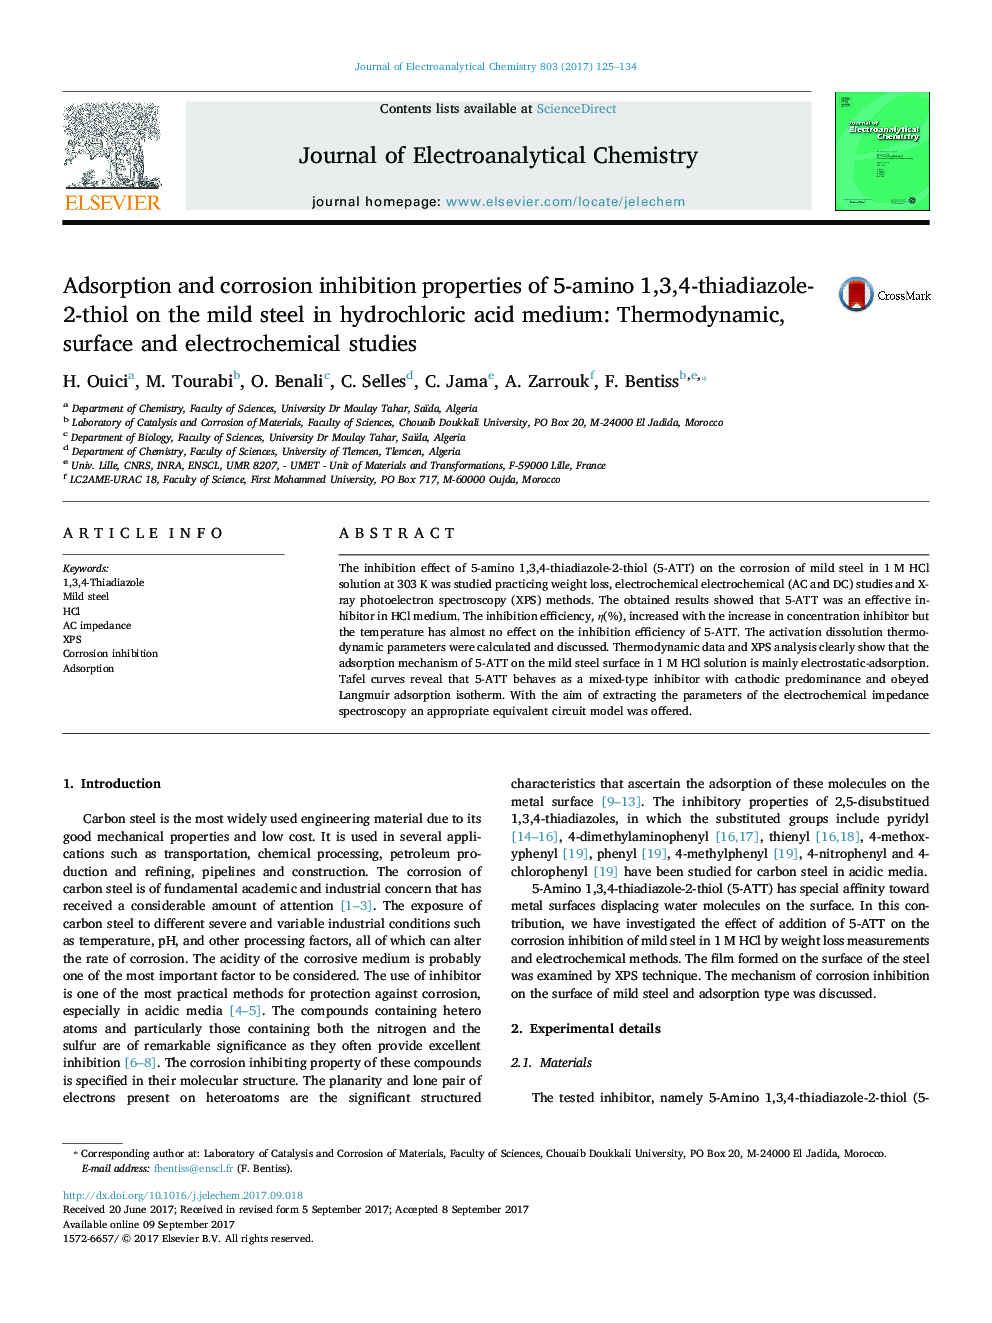 Adsorption and corrosion inhibition properties of 5-amino 1,3,4-thiadiazole-2-thiol on the mild steel in hydrochloric acid medium: Thermodynamic, surface and electrochemical studies